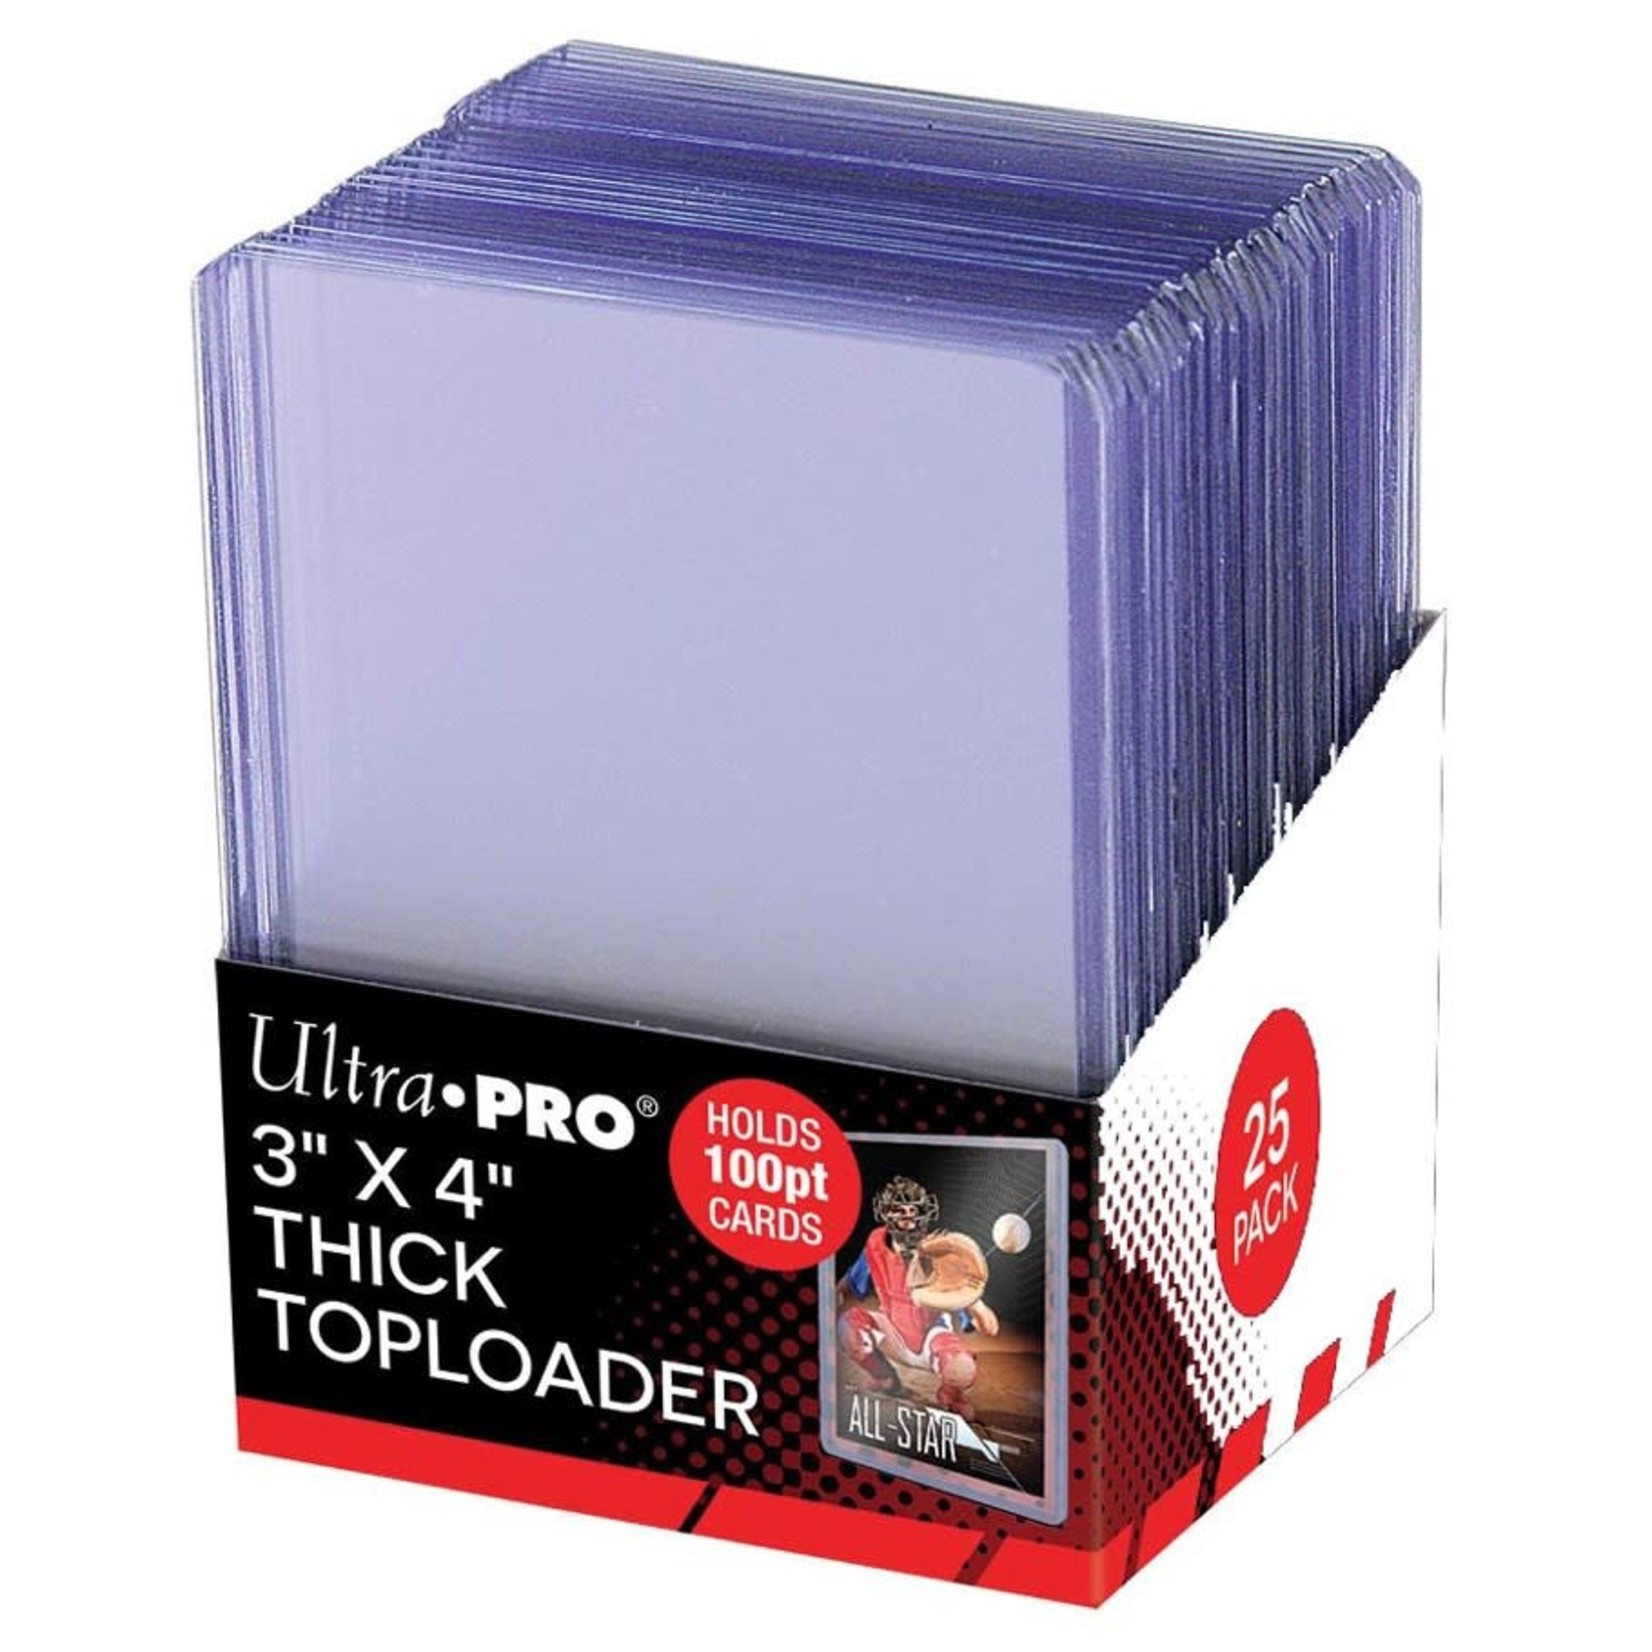 Ultra Pro Toploader (3"x4", 100-Point Thickness)